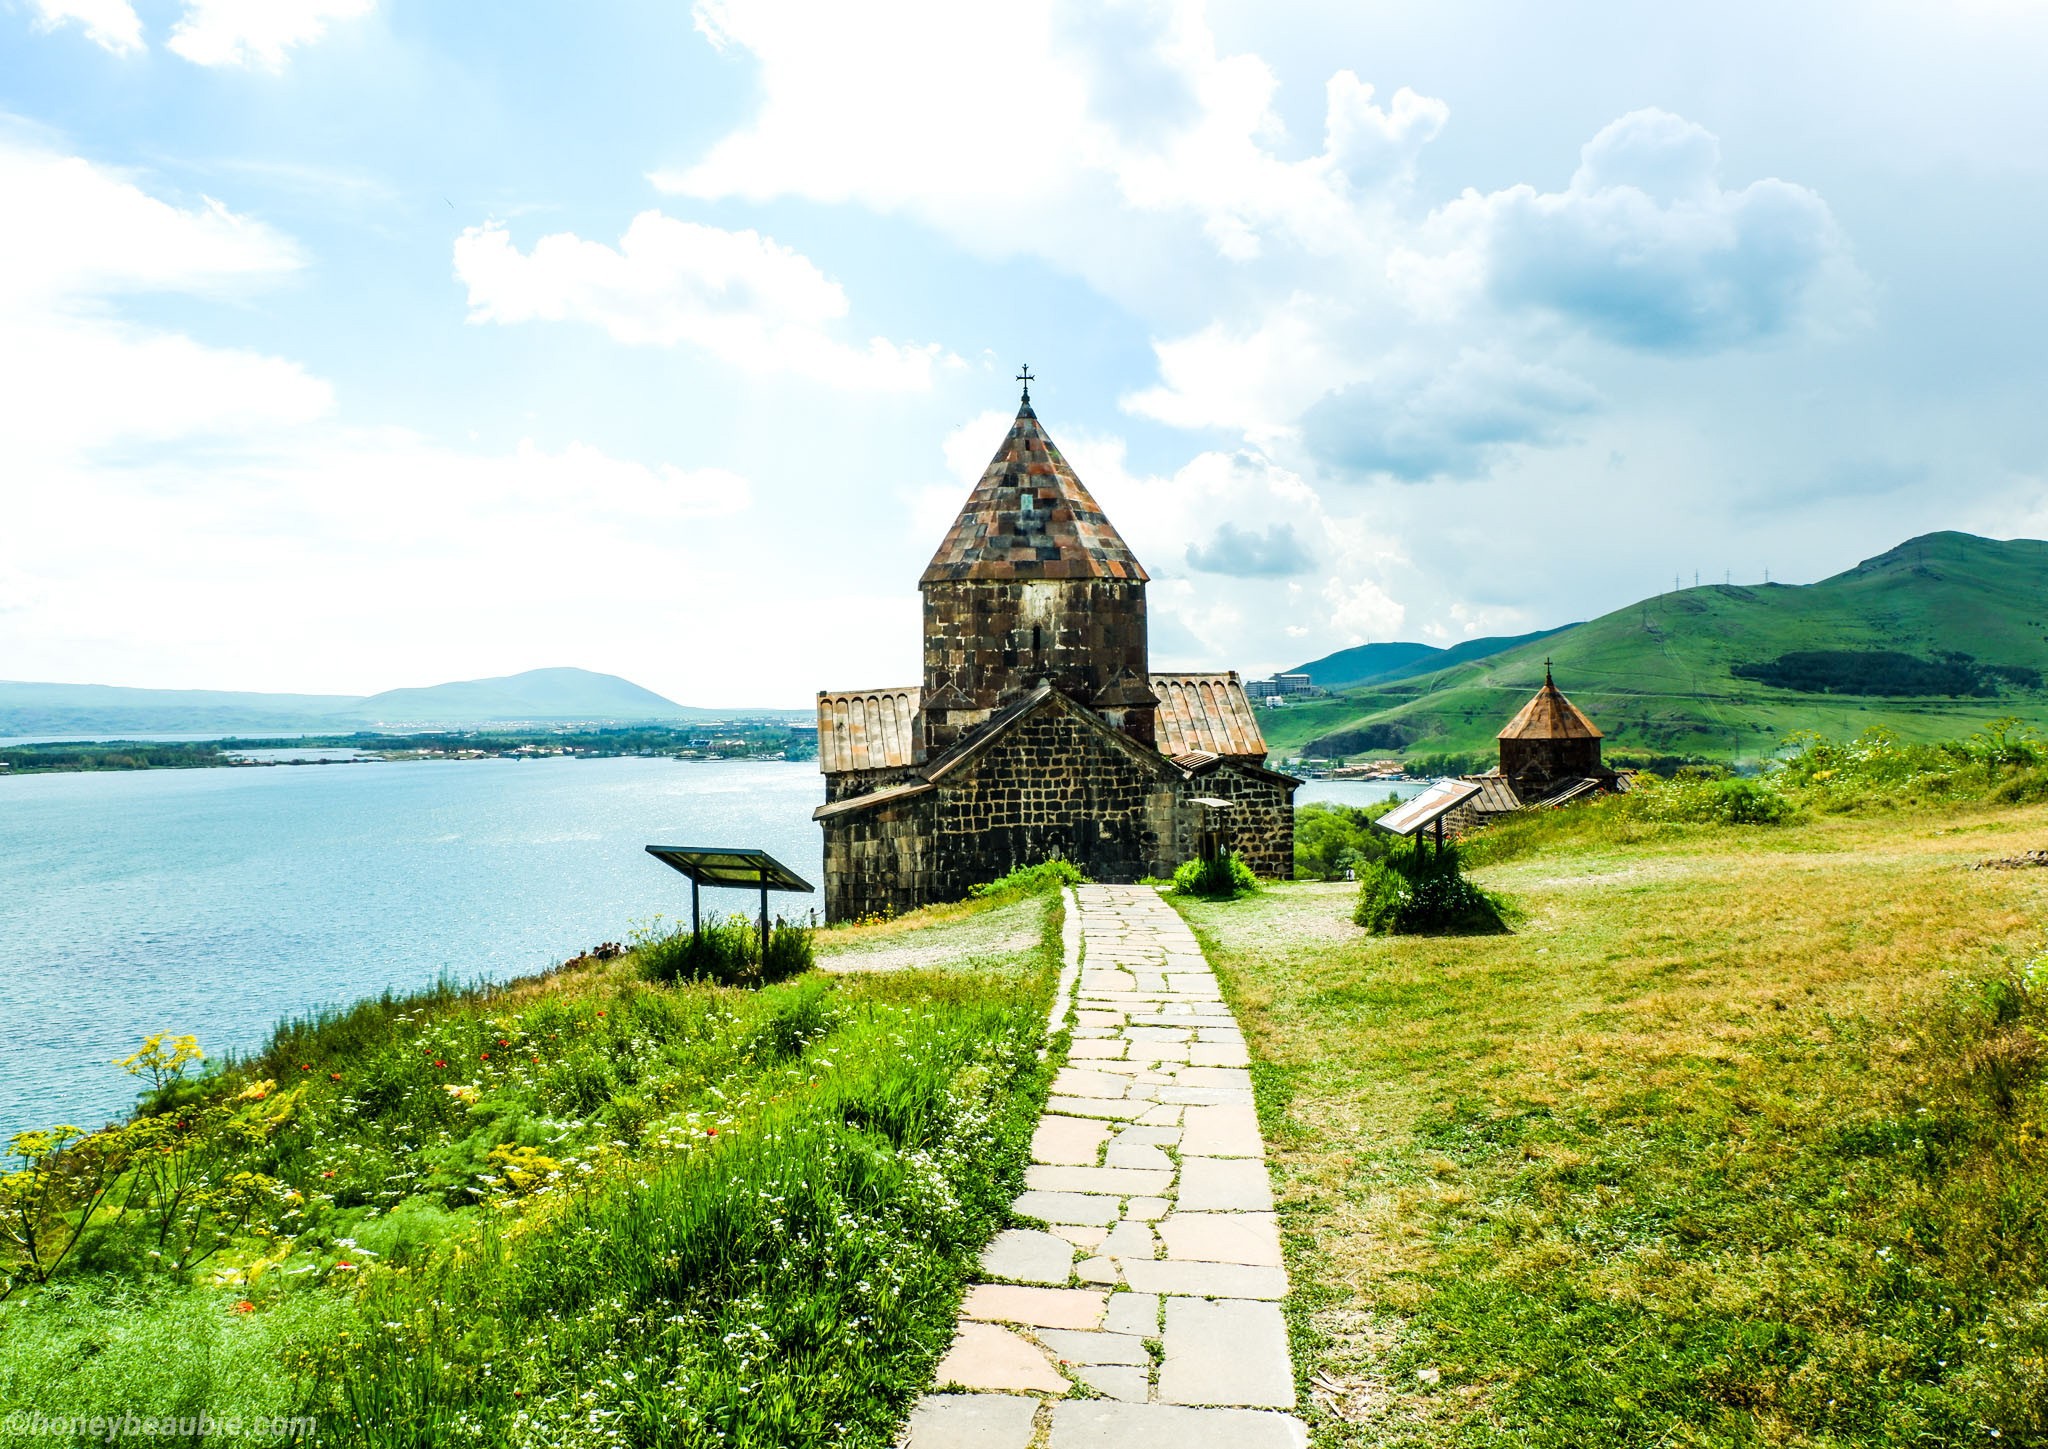 Landscape view of Sevanavank Monastery with Lake Sevan in the background.